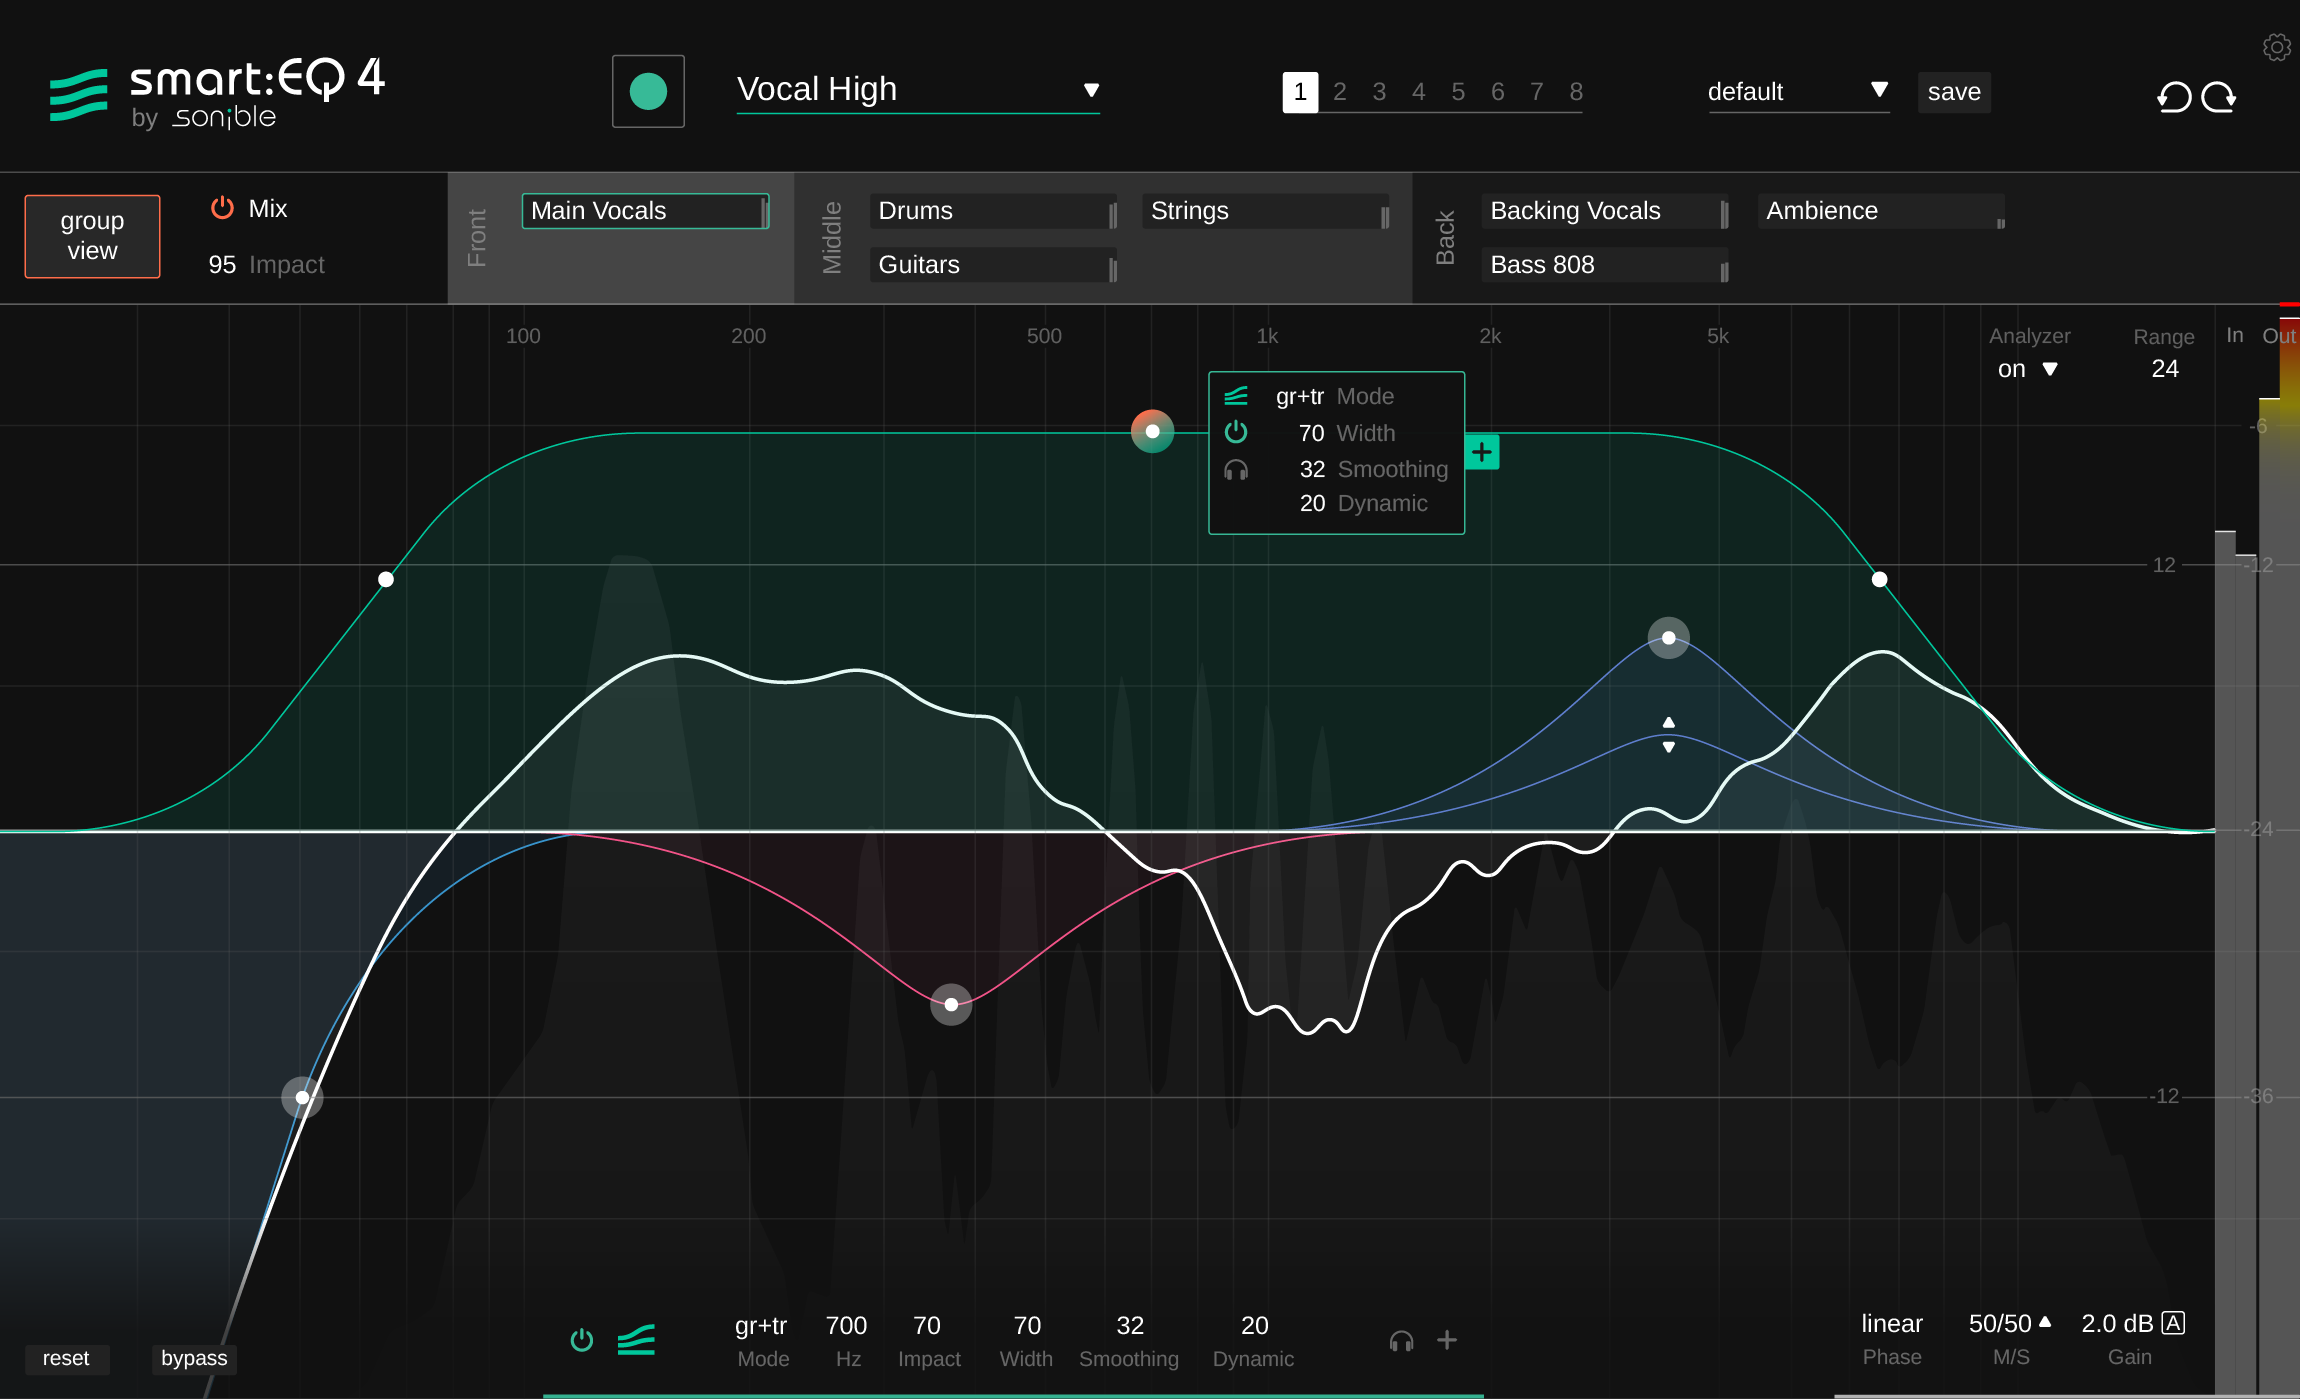 Unleash Precision with Sonible's smart:EQ 4 - Elevating Your Mix with AI Mastery!